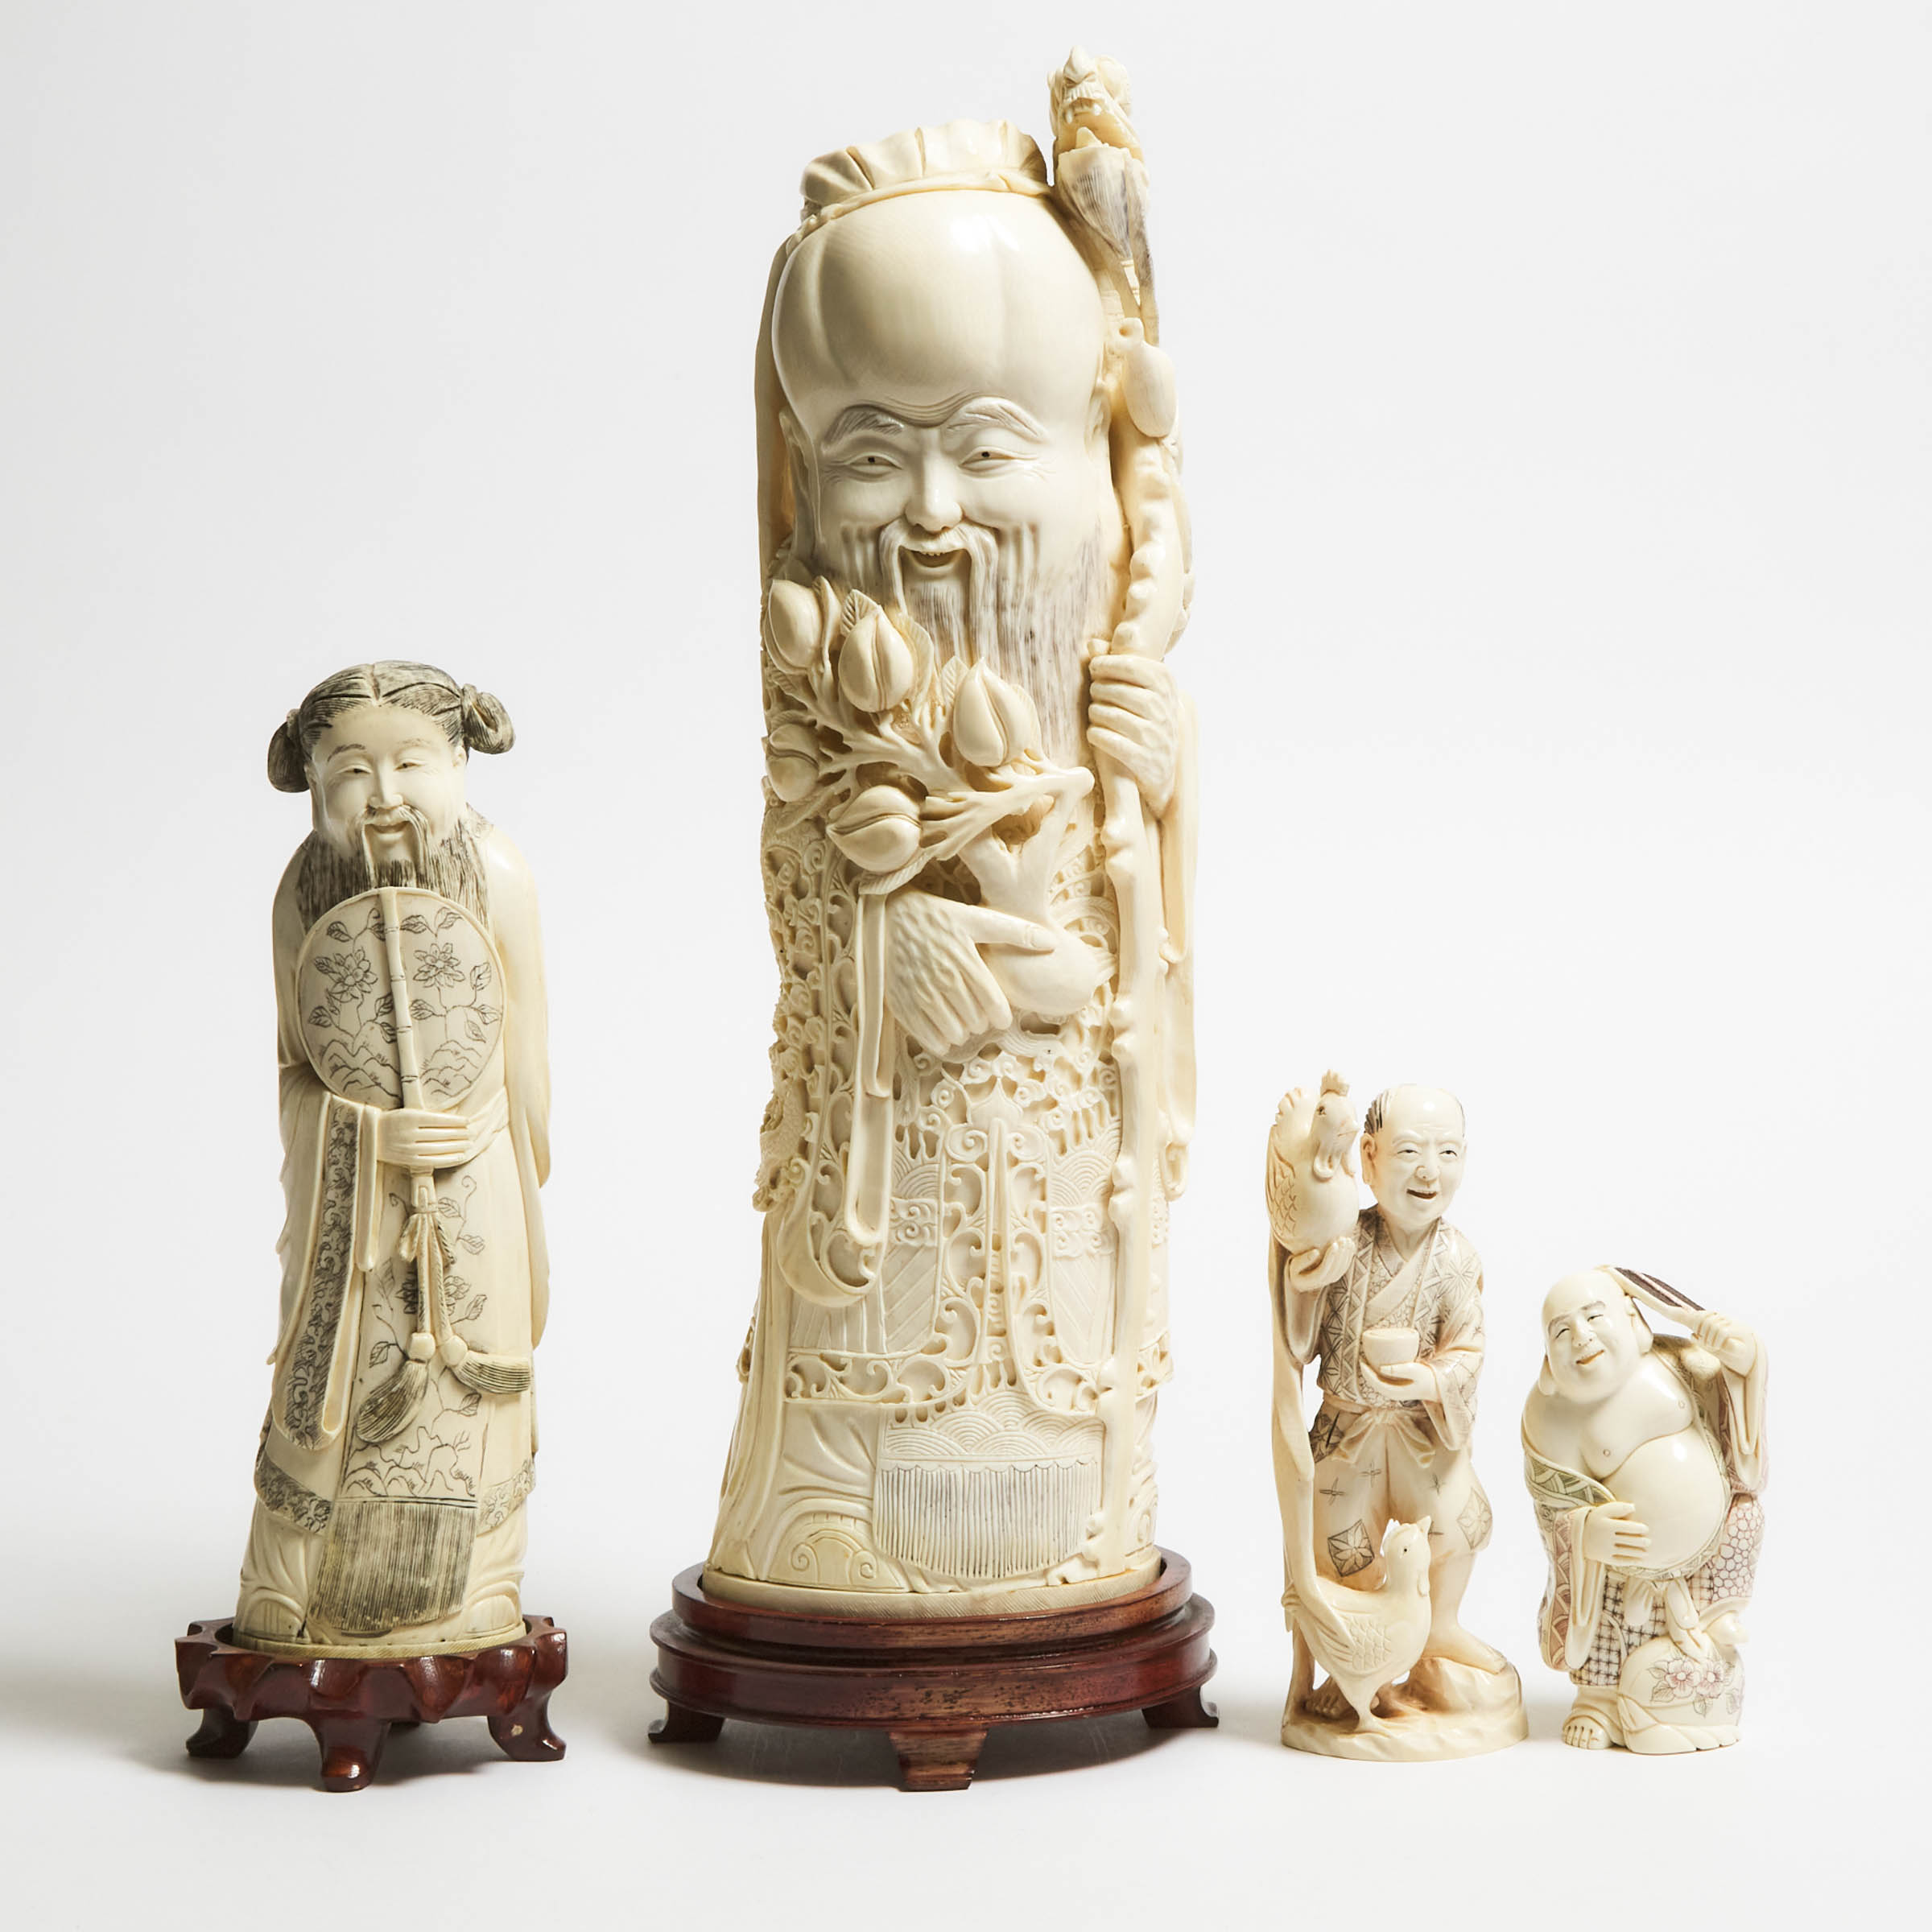 A Group of Four Ivory Figures, Early to Mid 20th Century